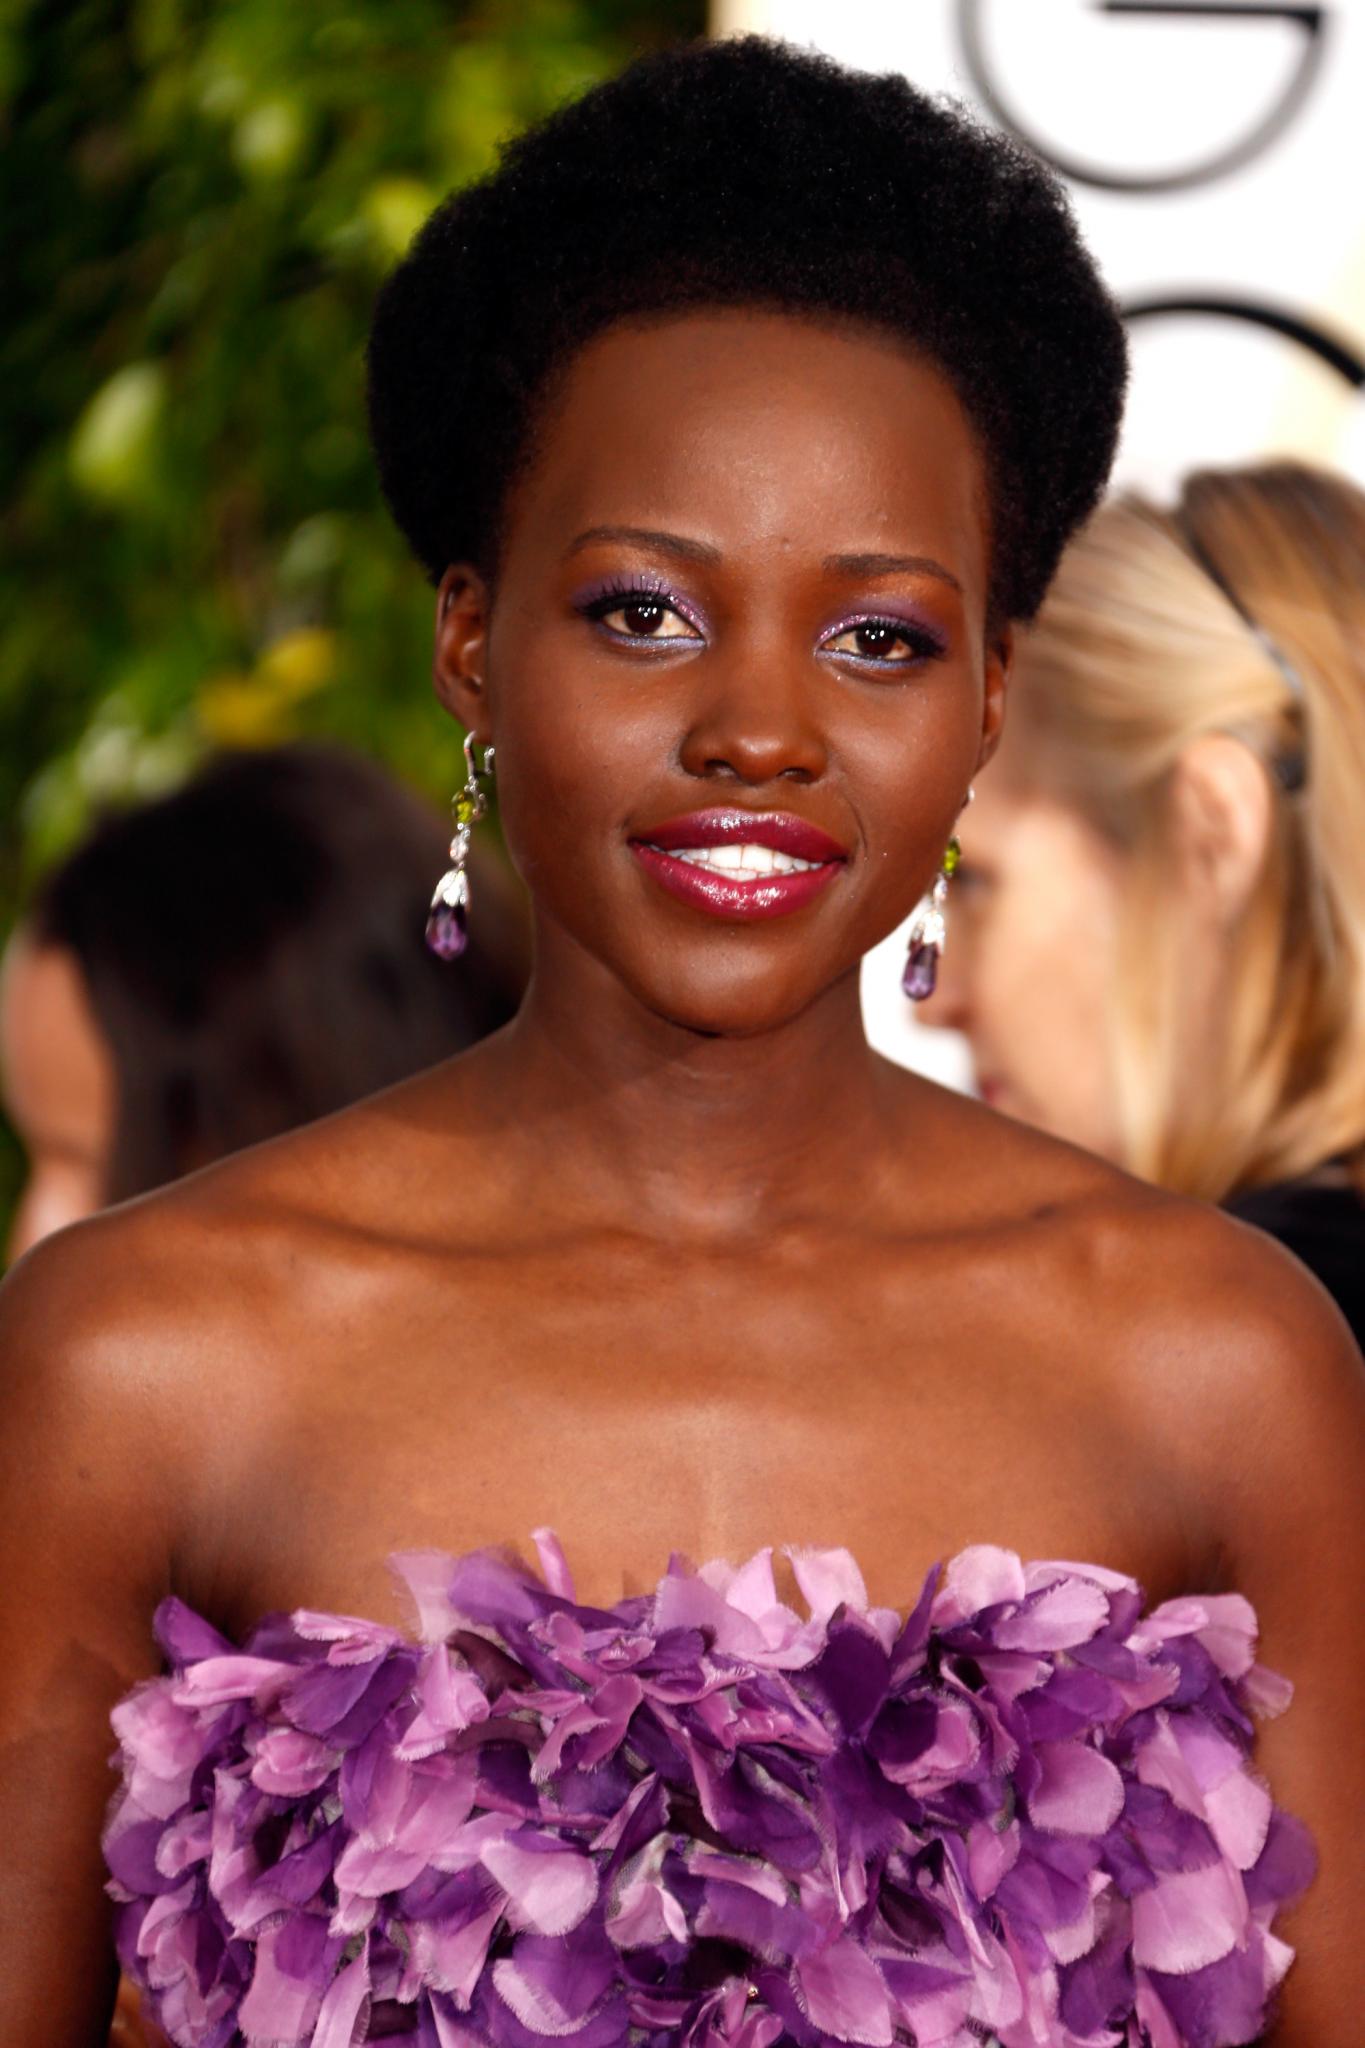 5 Best Hairstyles From the Golden Globe Awards